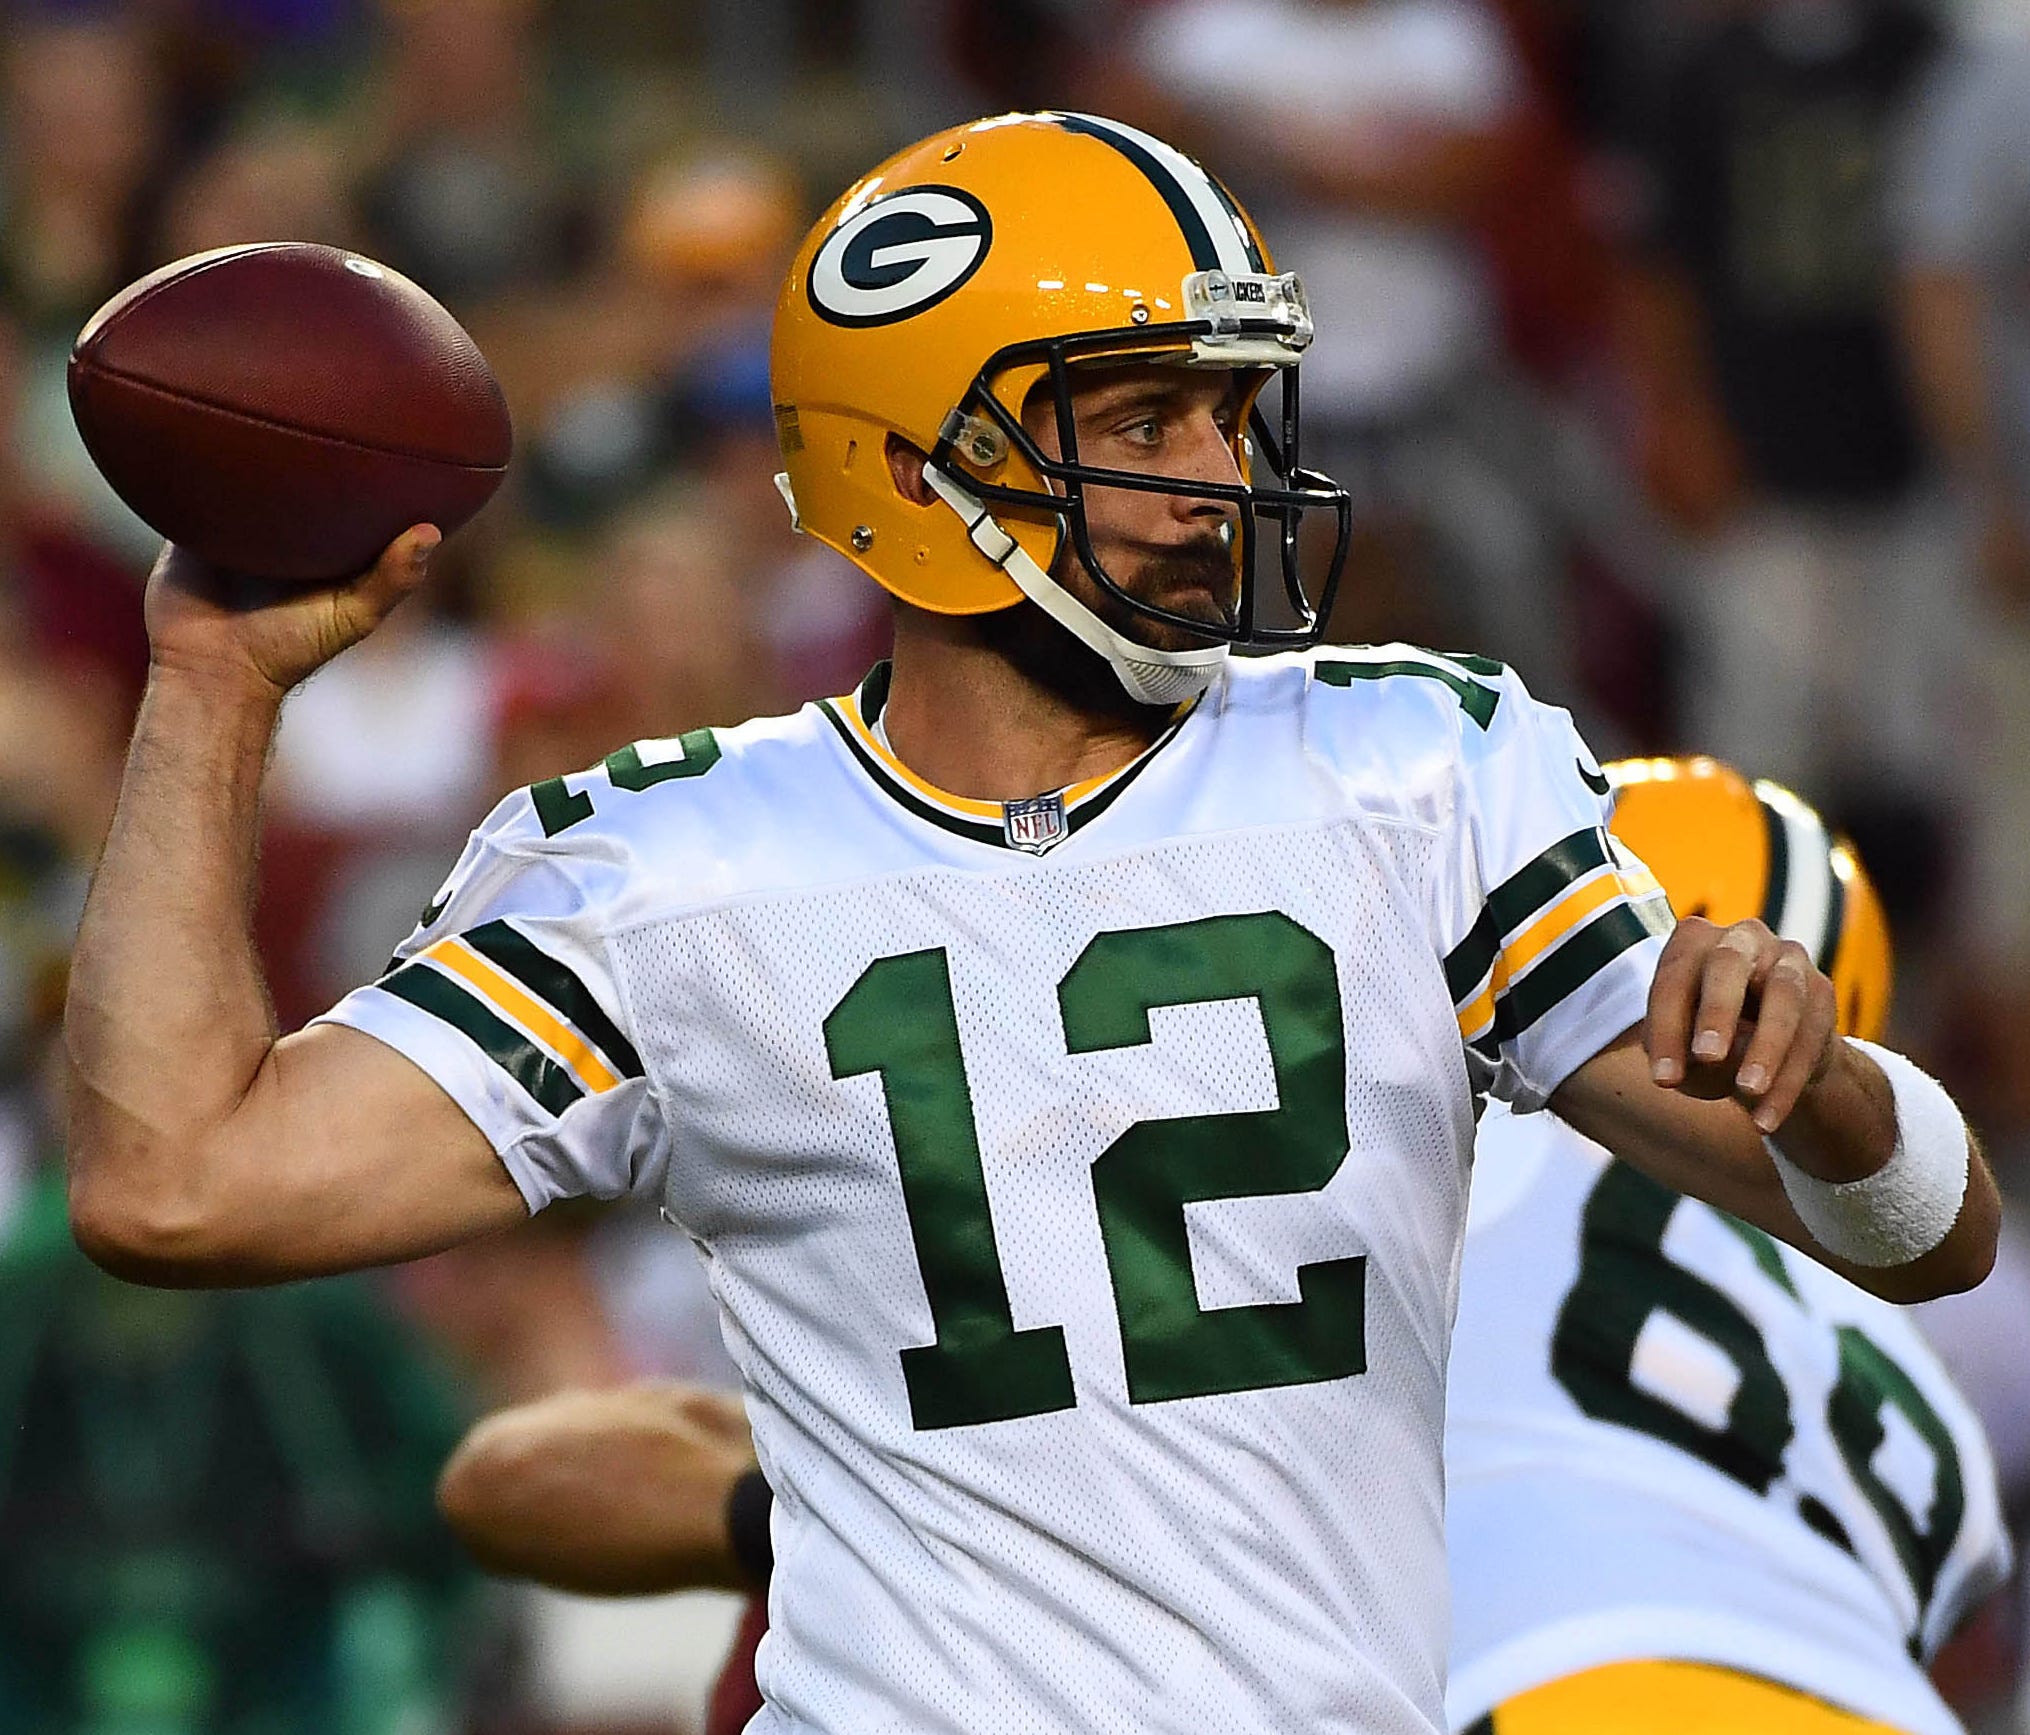 Green Bay Packers quarterback Aaron Rodgers drops back to pass against the Washington Redskins during the first half of a preseason game at FedEx Field.